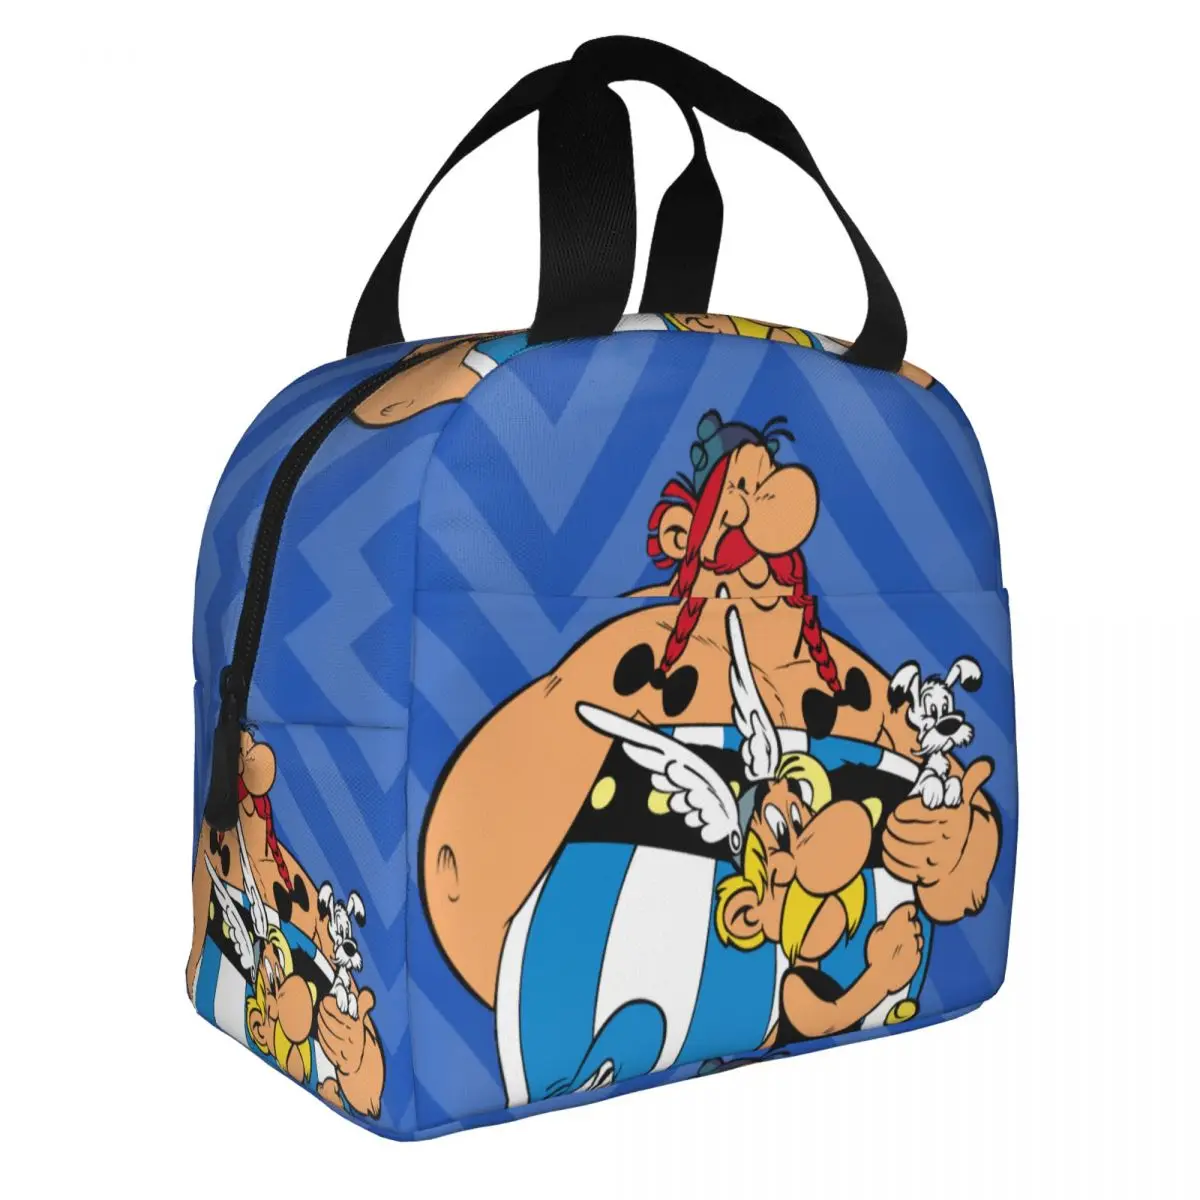 Asterix And Obelix Lunch Bento Bags Portable Aluminum Foil thickened Thermal Cloth Lunch Bag for Women Men Boy